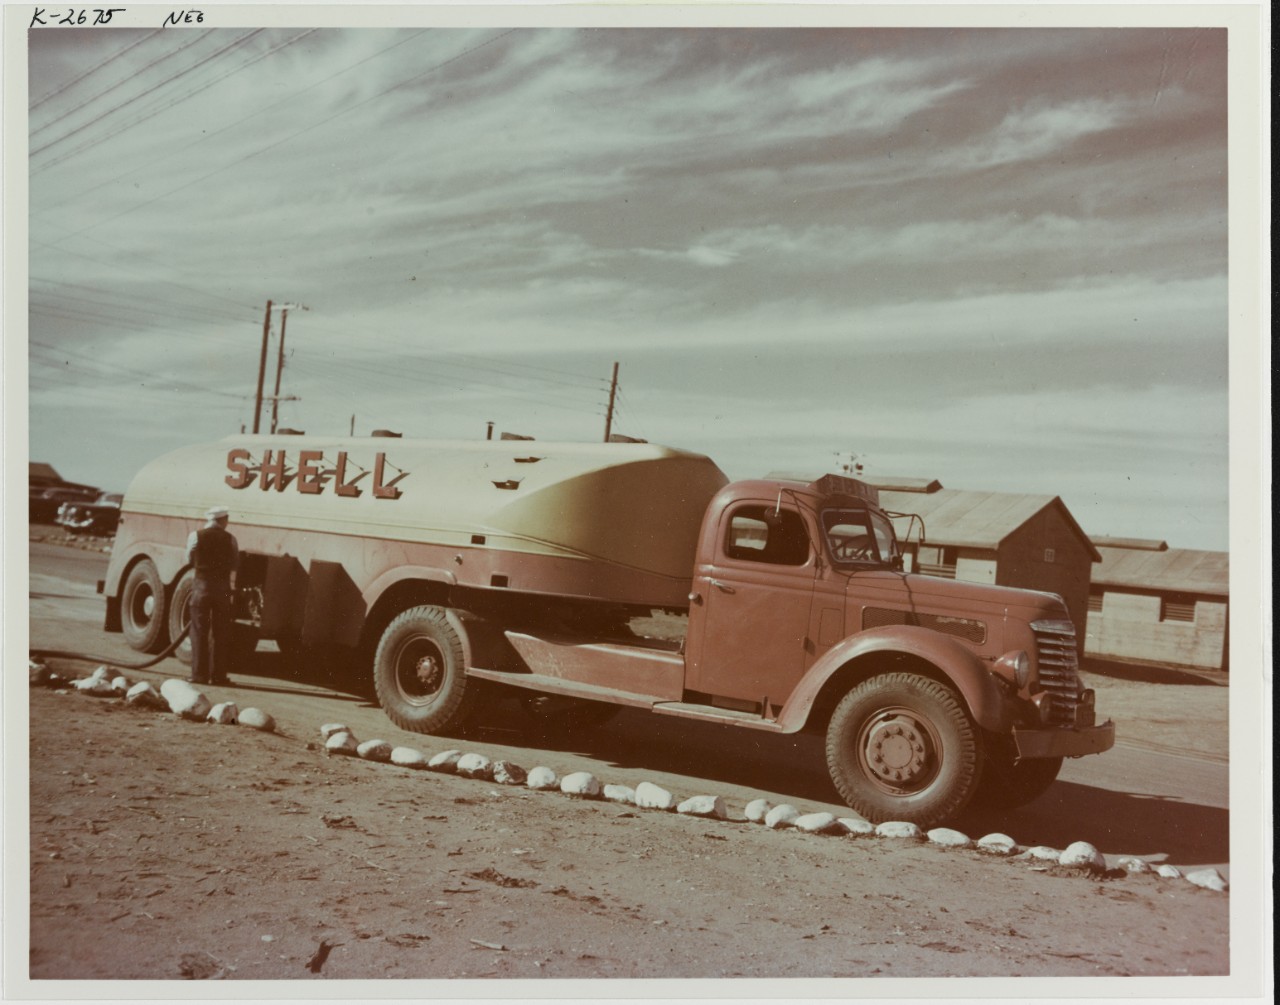 NAAS Kearney, California. "Shell" Oil Company tank truck delivers fuel to the air station, circa 1944